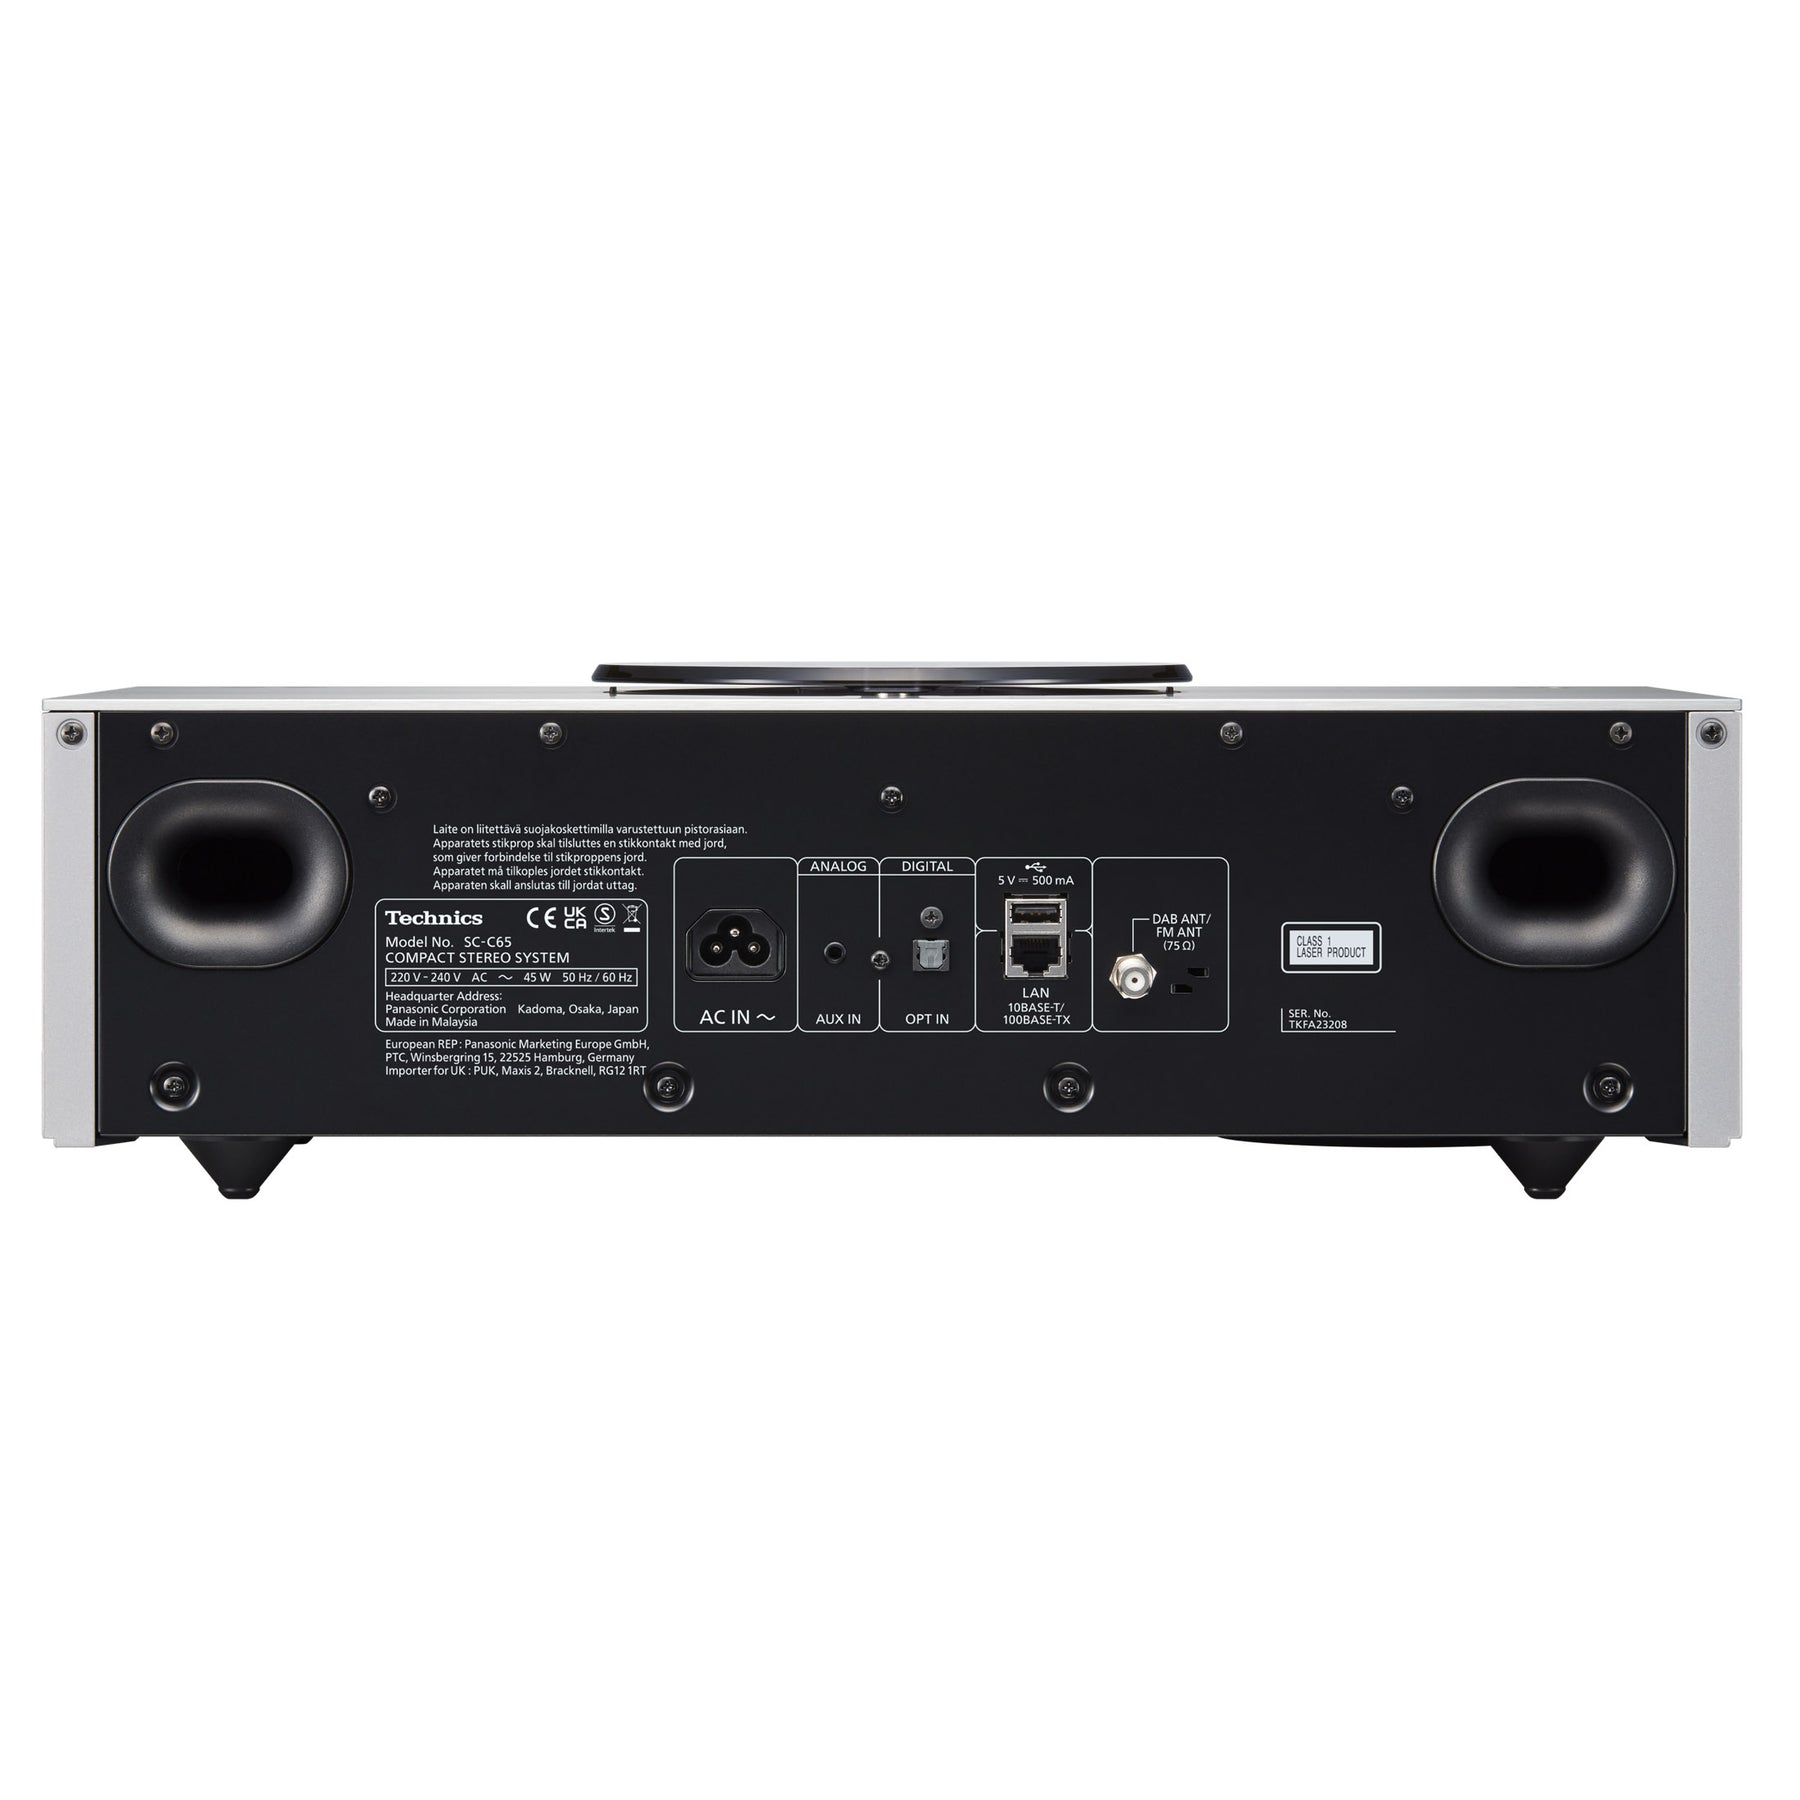 All-in-One Music System SC-C65